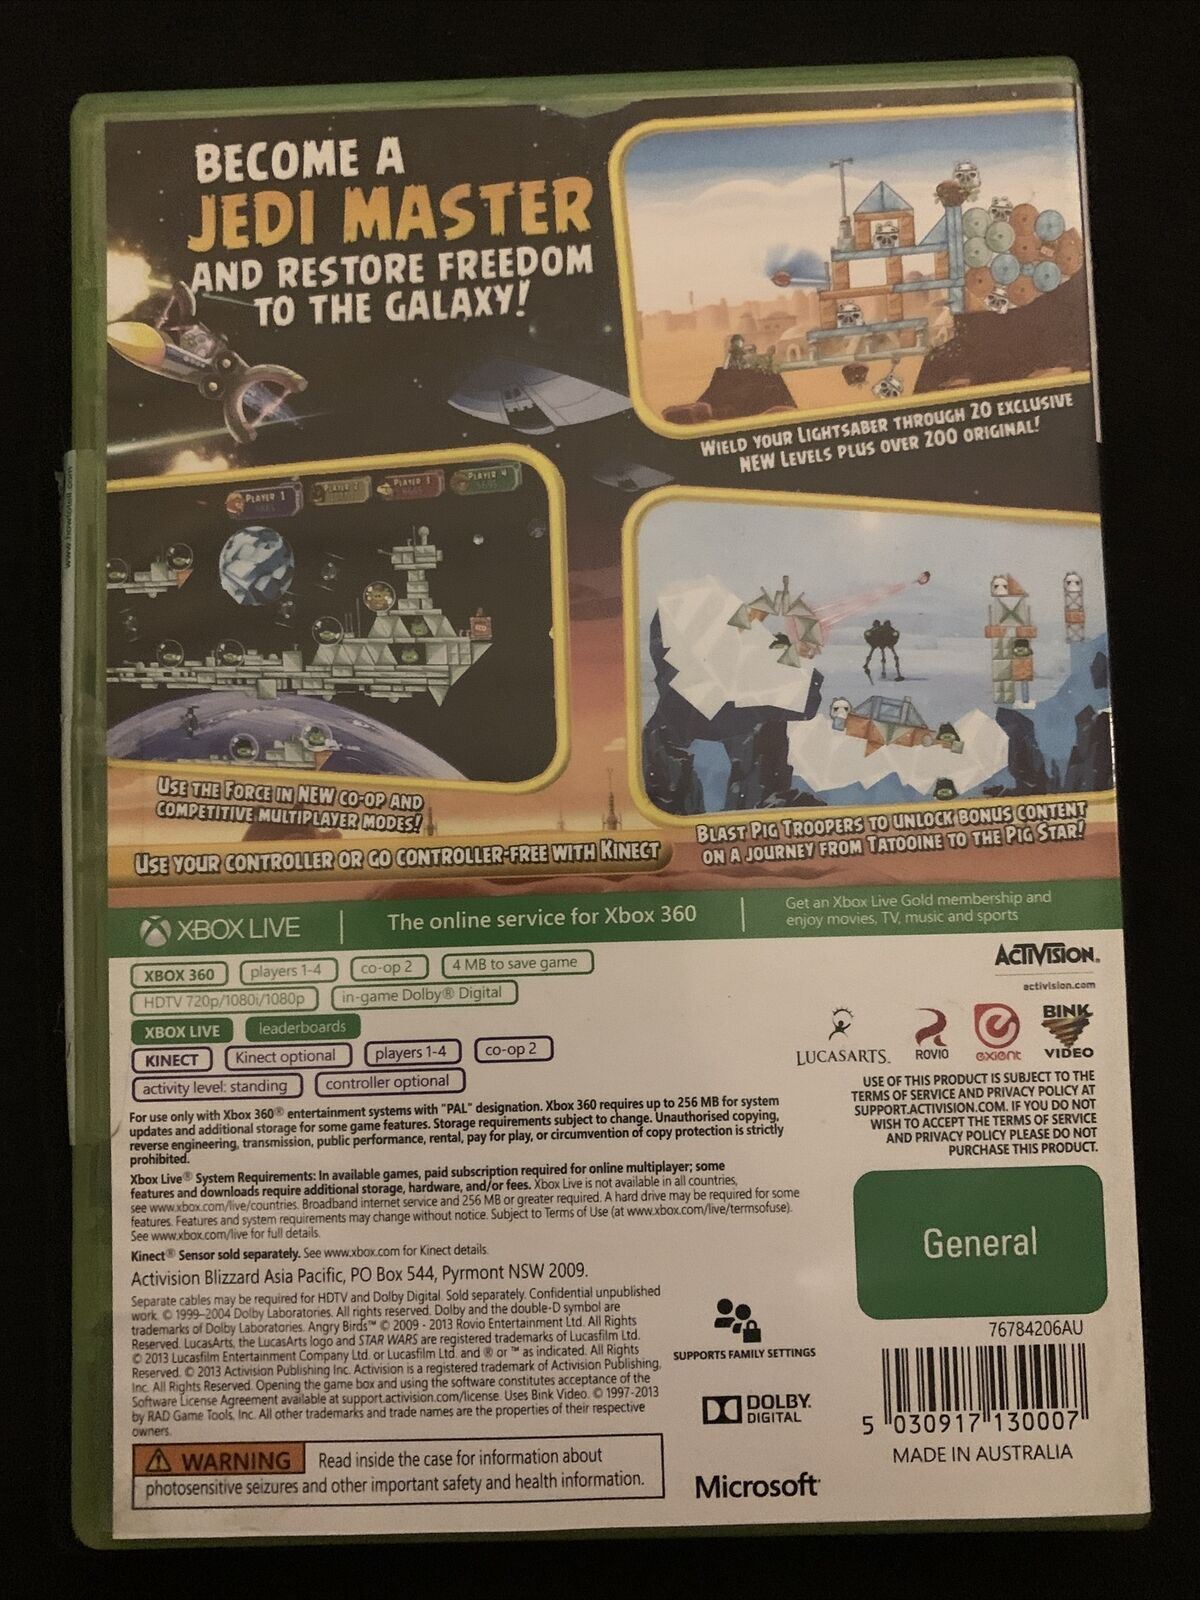 Angry Birds Star Wars - Xbox 360 PAL Game